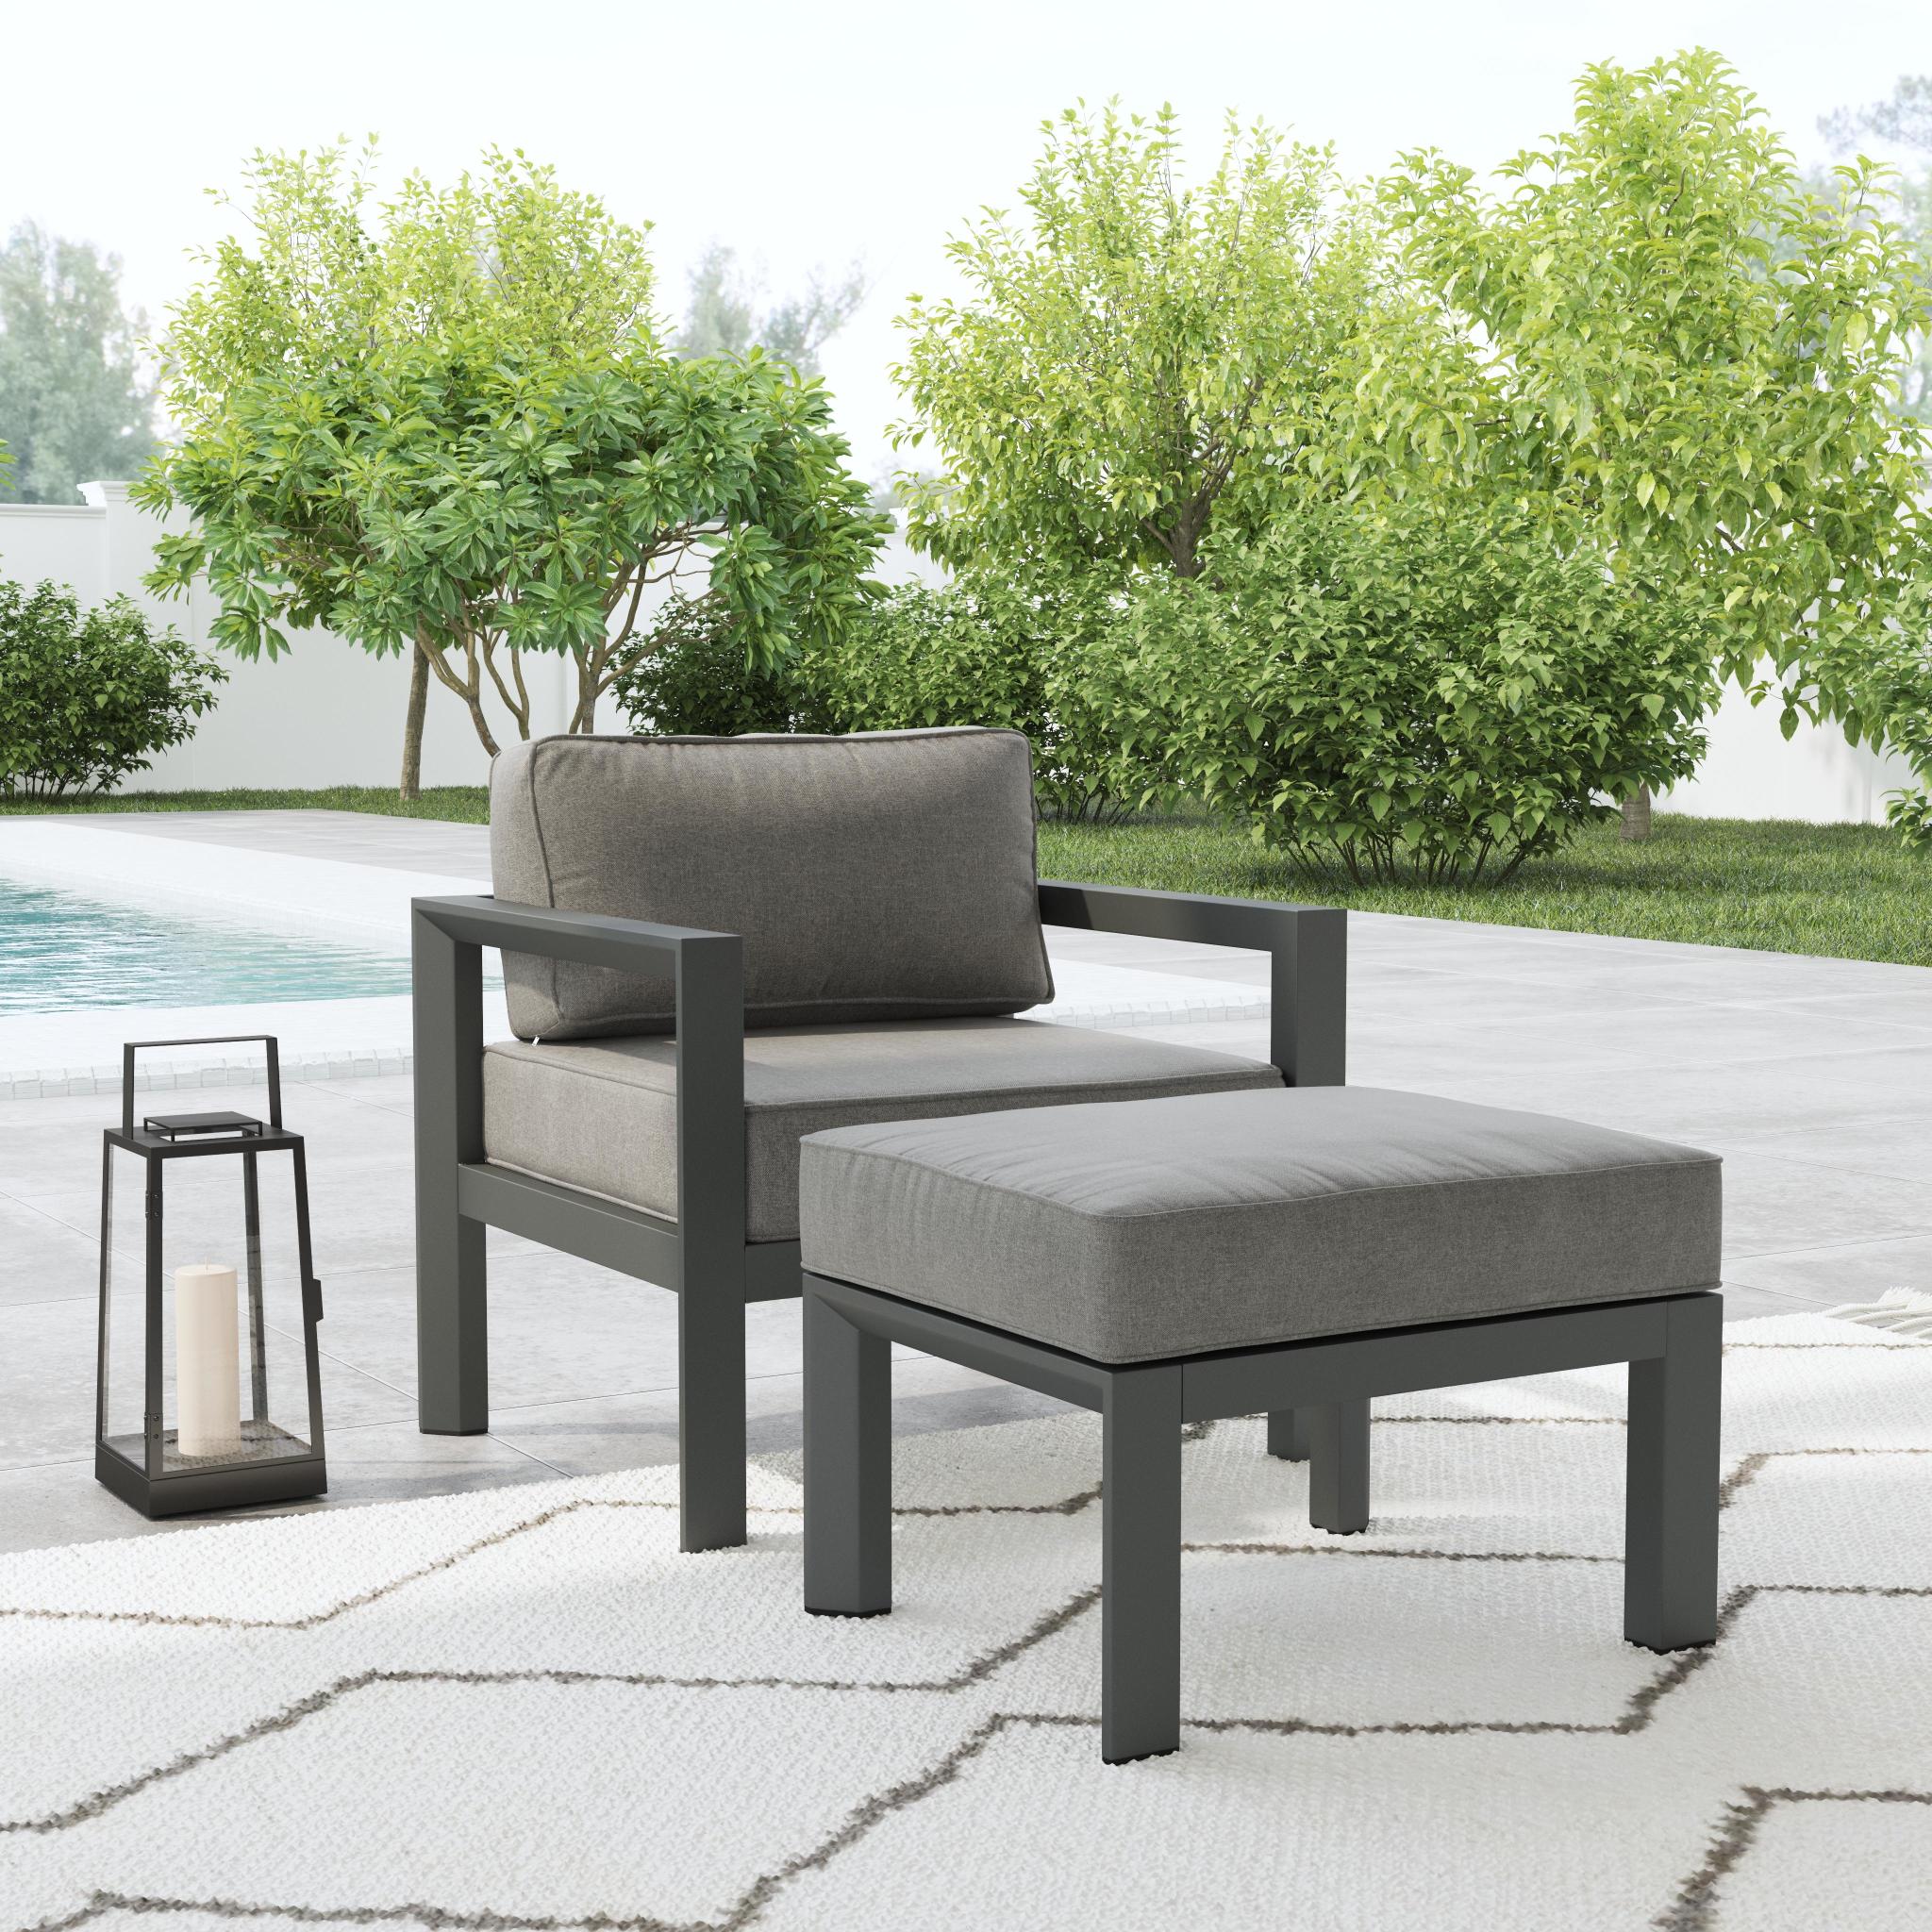 Homestyles Grayton Aluminum Outdoor Aluminum Lounge Chair in Gray - image 4 of 10